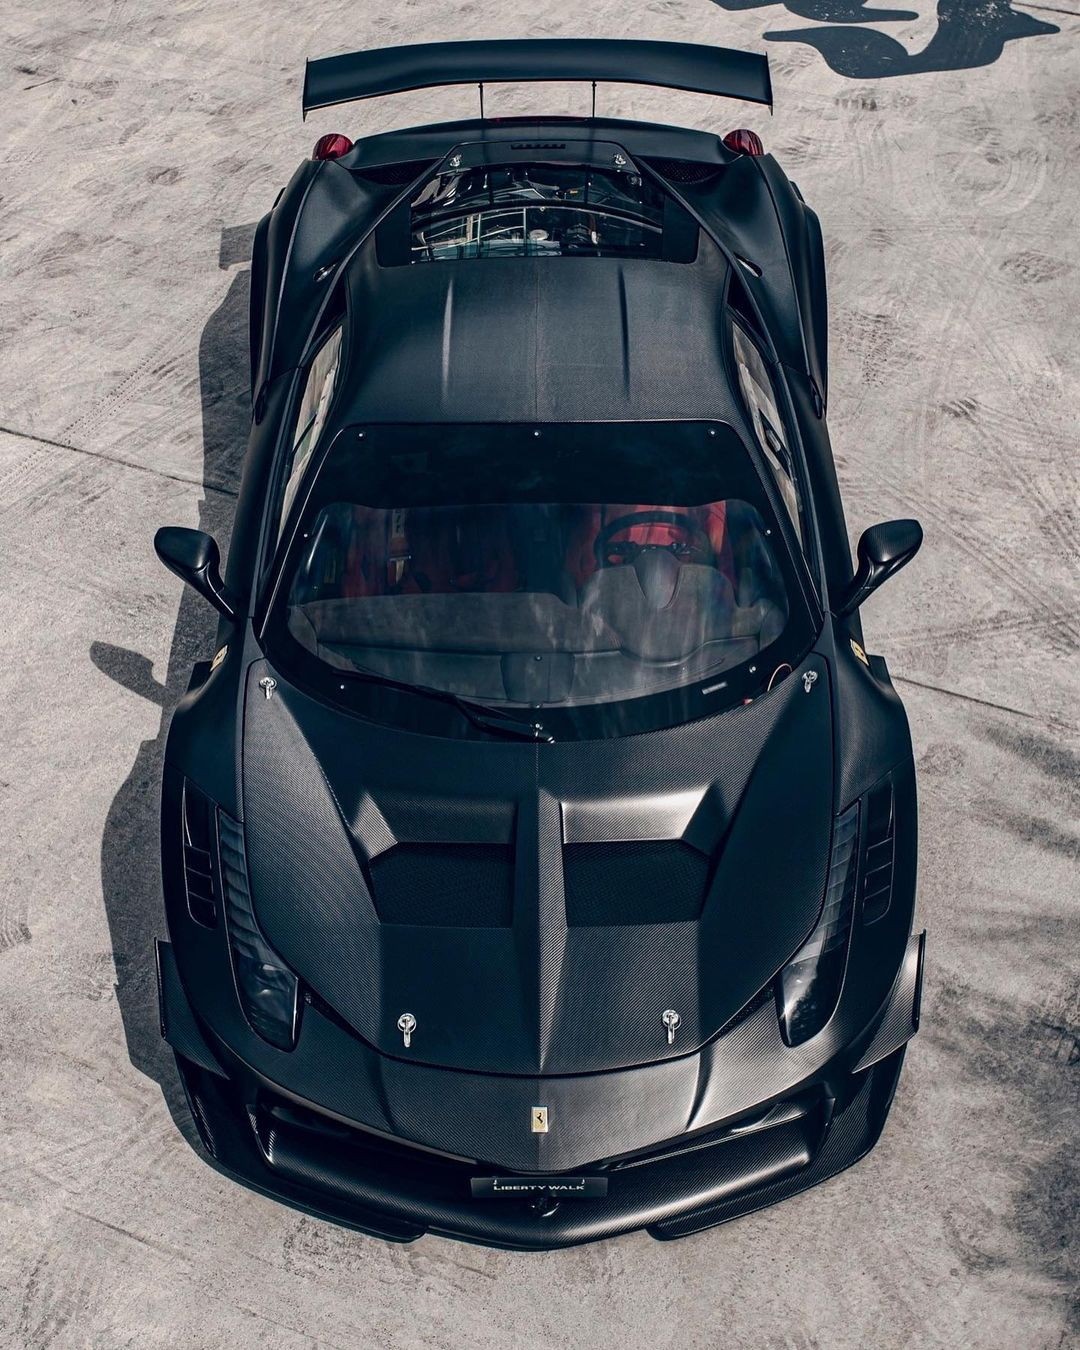 Is This the Sexiest Ferrari 458 You've Ever Seen or What? - autoevolution